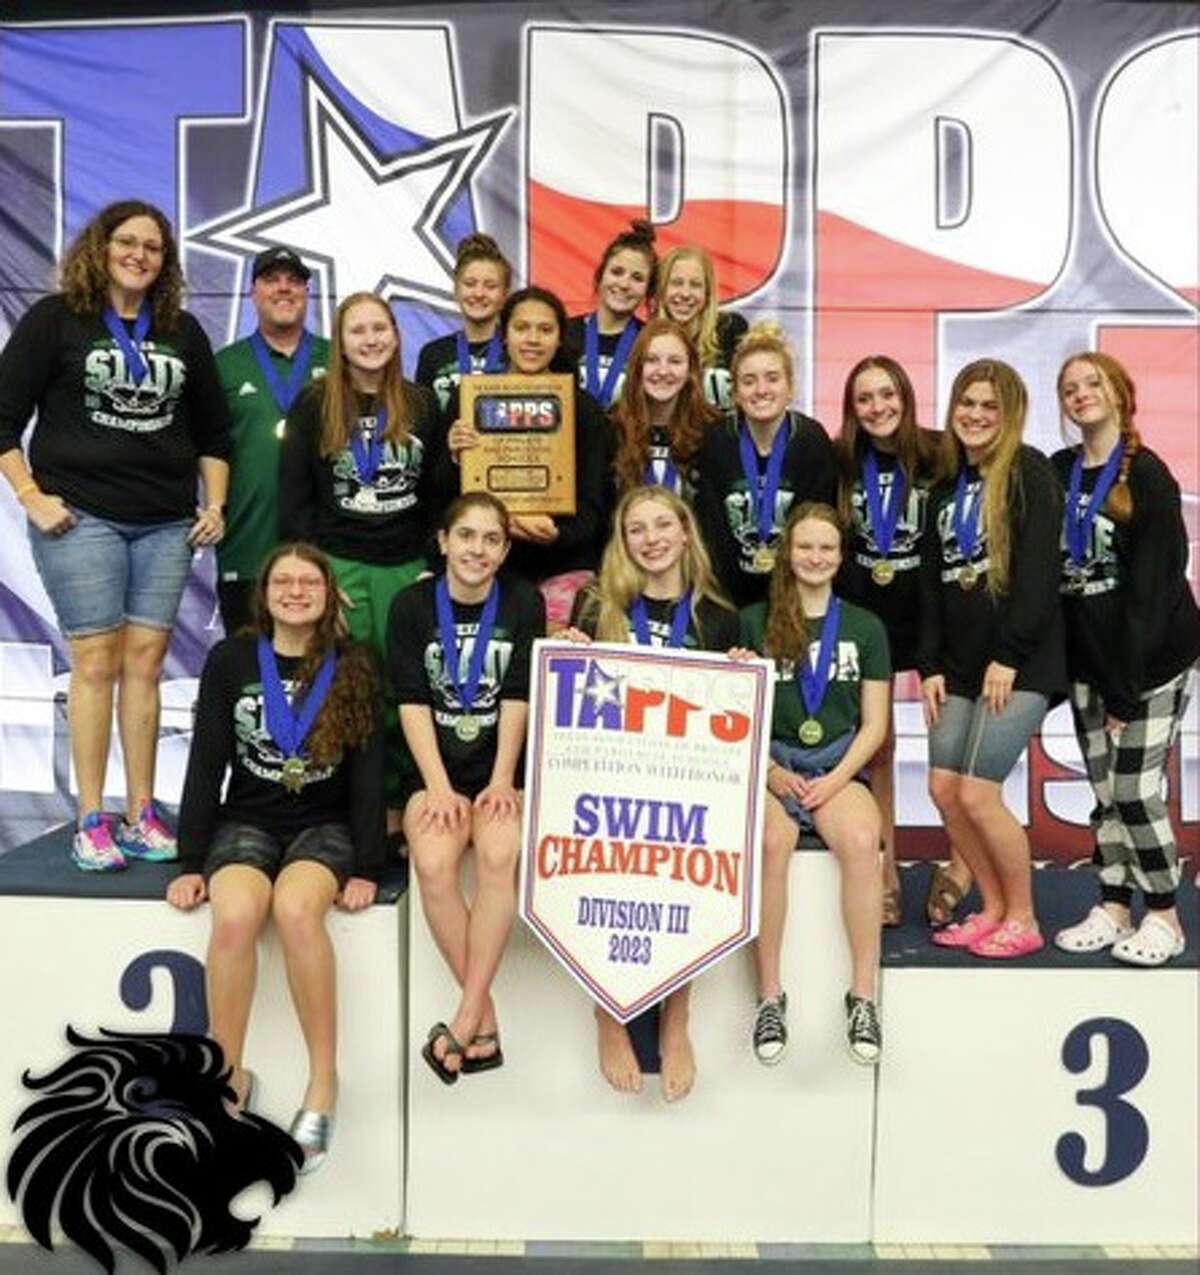 The Legacy Prep Christian Academy girls swimming team repeated as TAPPS Division III state champions, winning all three relays Monday at the state meet in San Antonio.